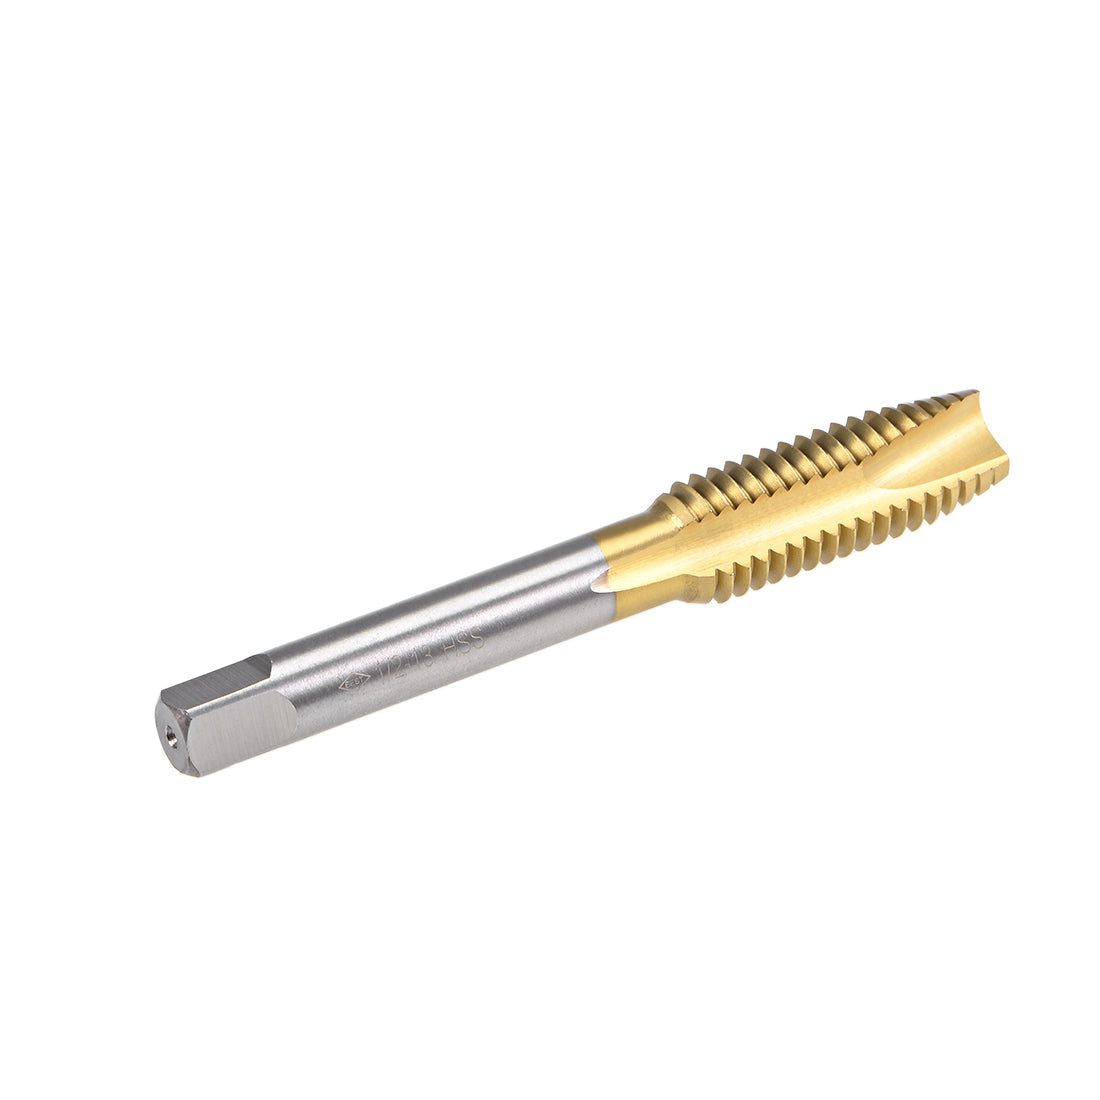 uxcell Uxcell Spiral Point Threading Tap 1/2-13 UNC Thread Pitch Titanium Coated HSS